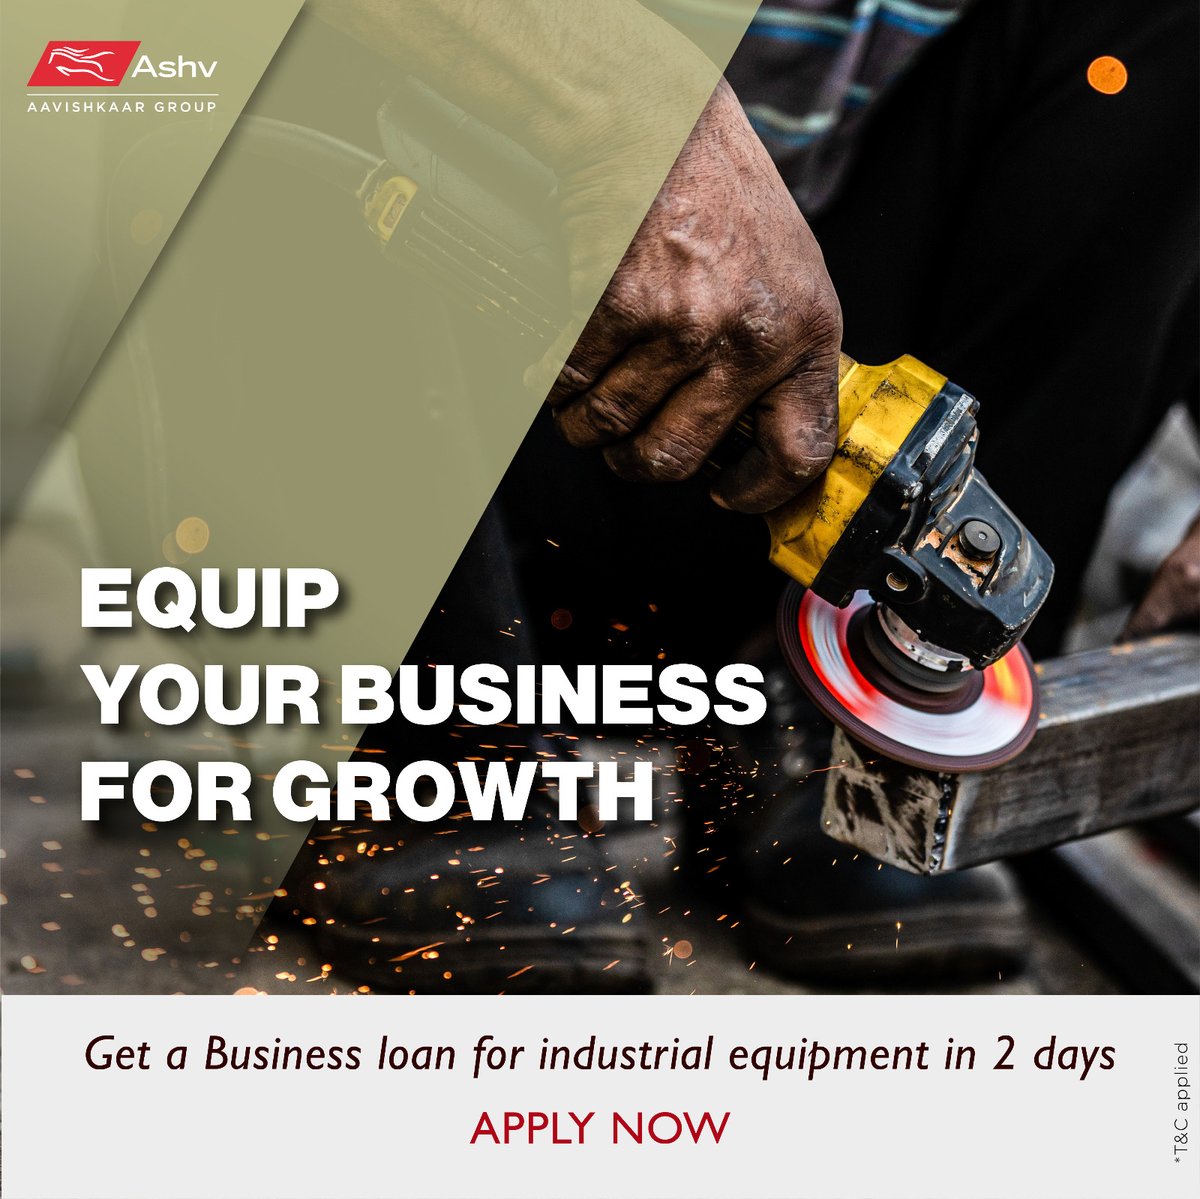 Equip your business for Growth. 

Get a Business loan for industrial equipment in 2 days. Apply Now: ashvfinance.com/apply-now
.
.
.
.
#AshvFinance #financeforsmallbusinessowners #BusinessLoans #smallbusinessloans #loansforsmallbusinesses #smeloans